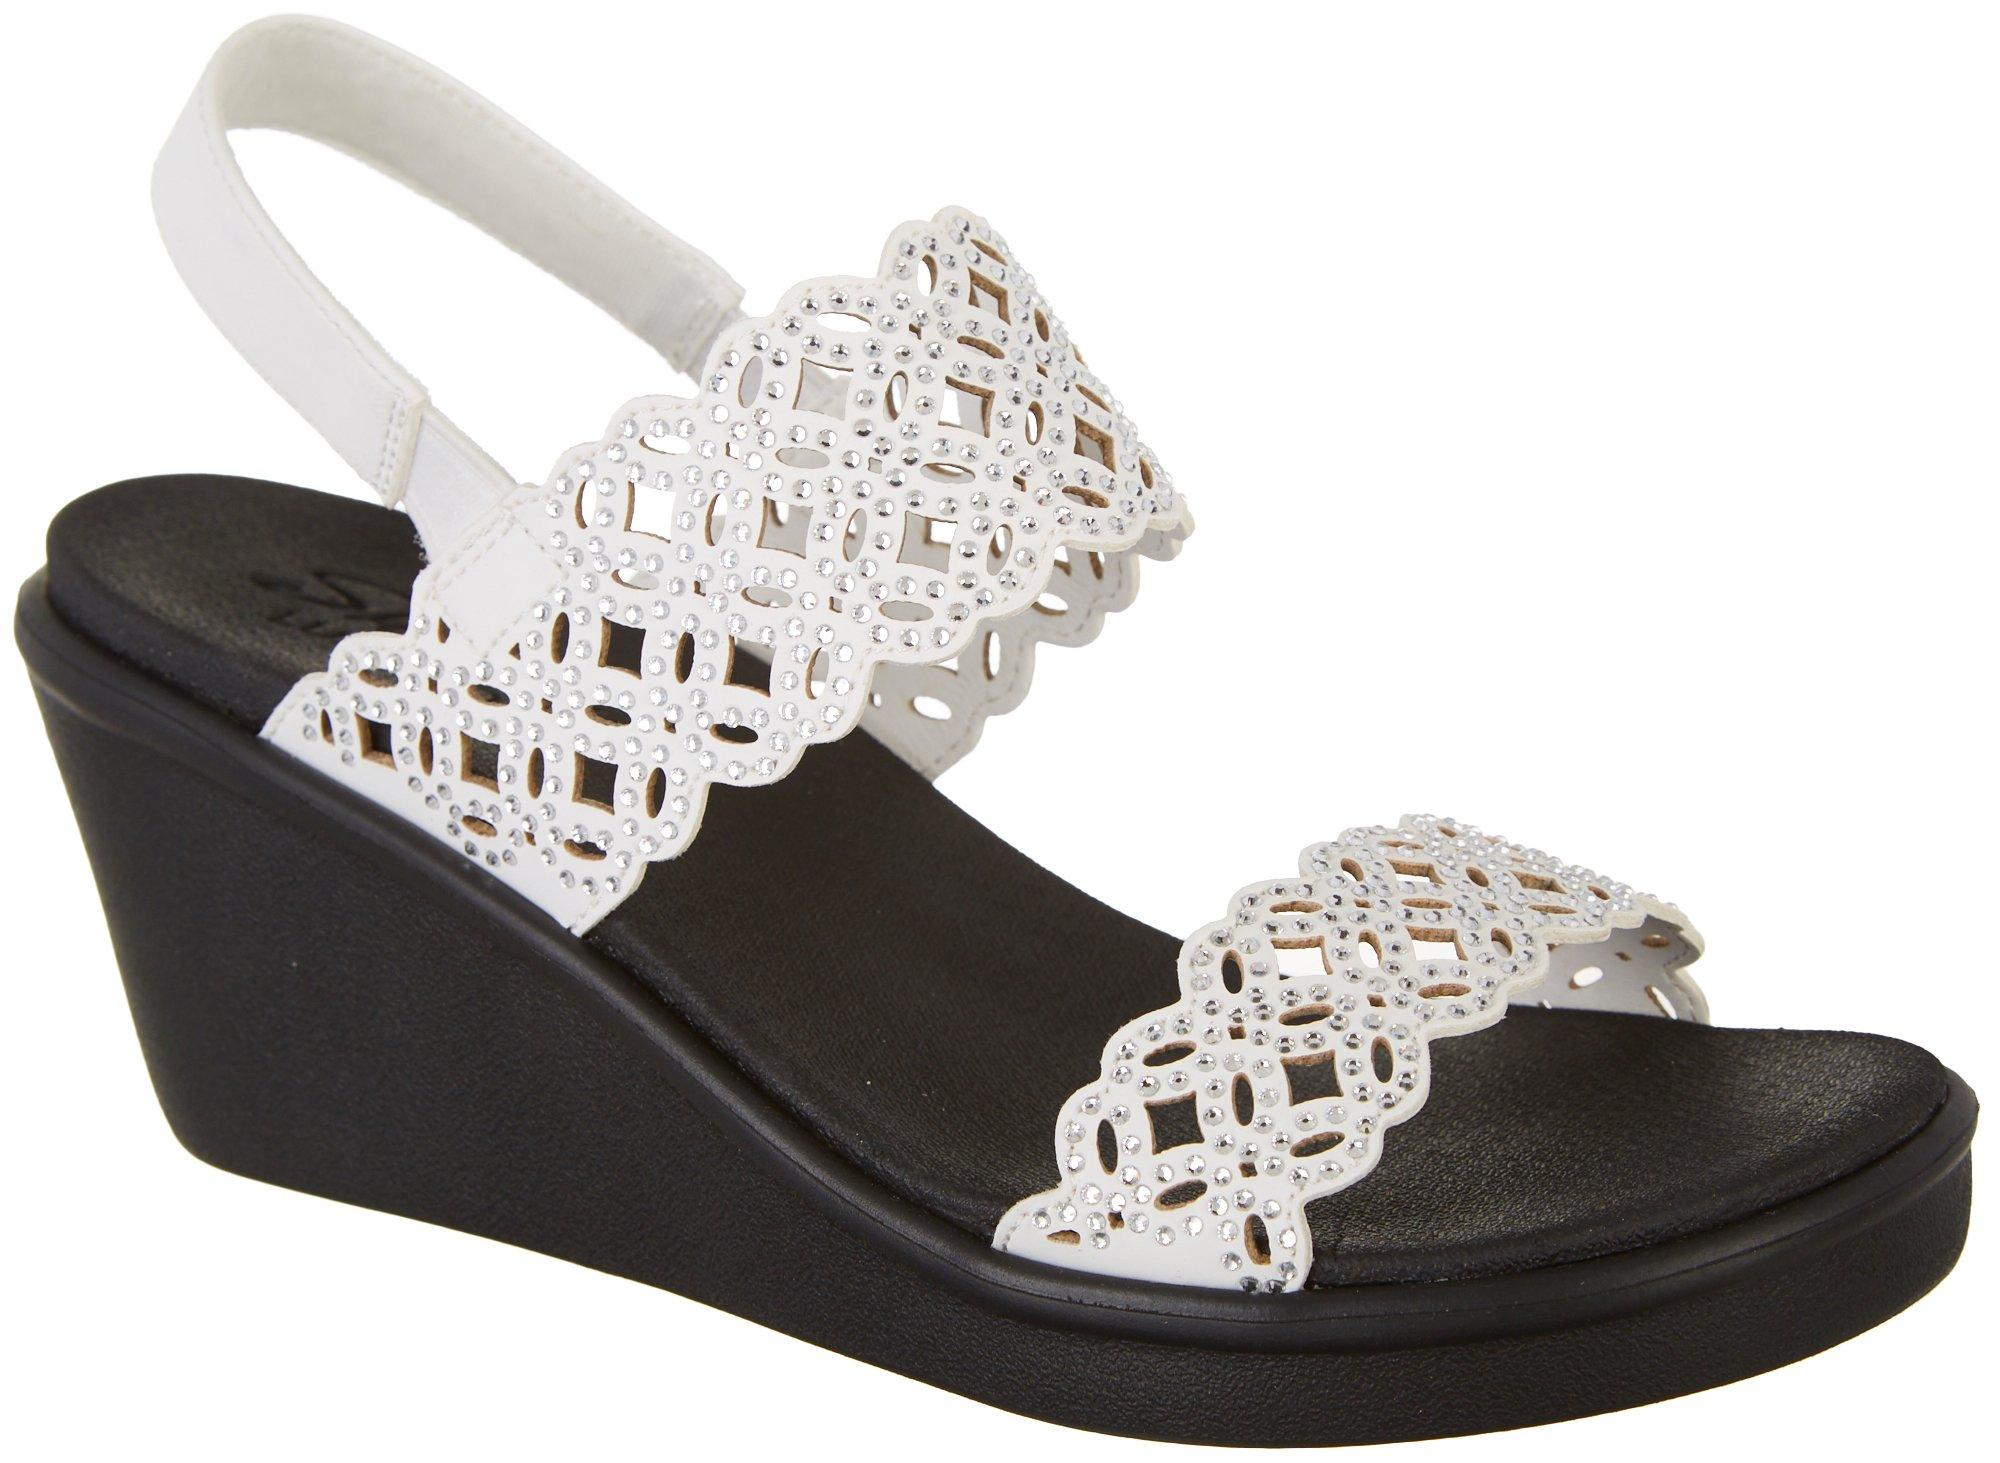 Womens Rumble on Wedge Sandals